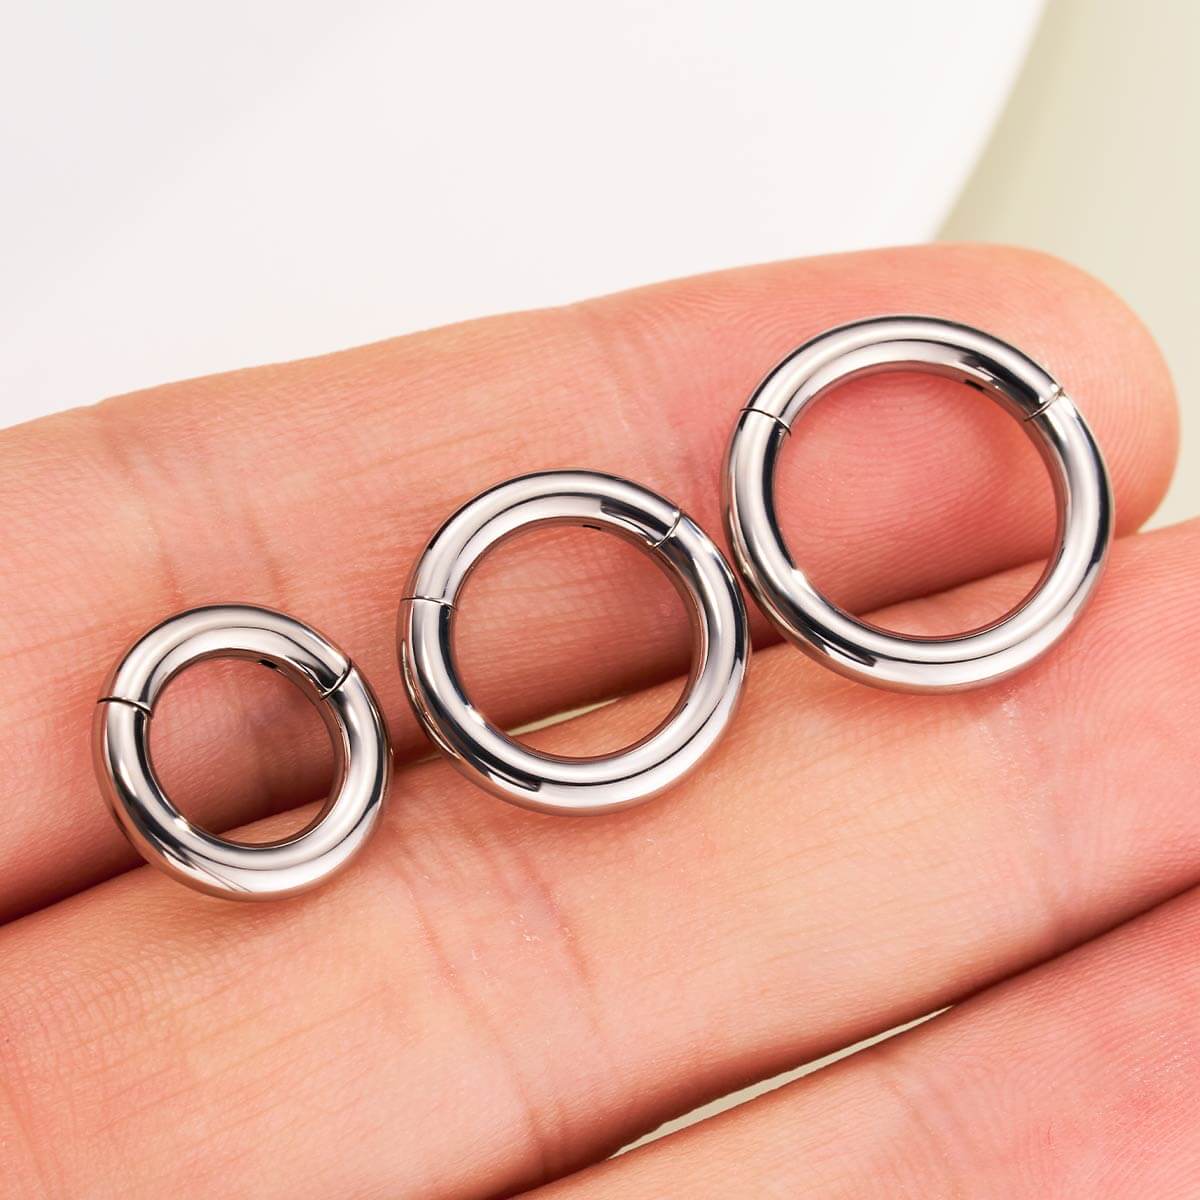 10g thick septum ring 